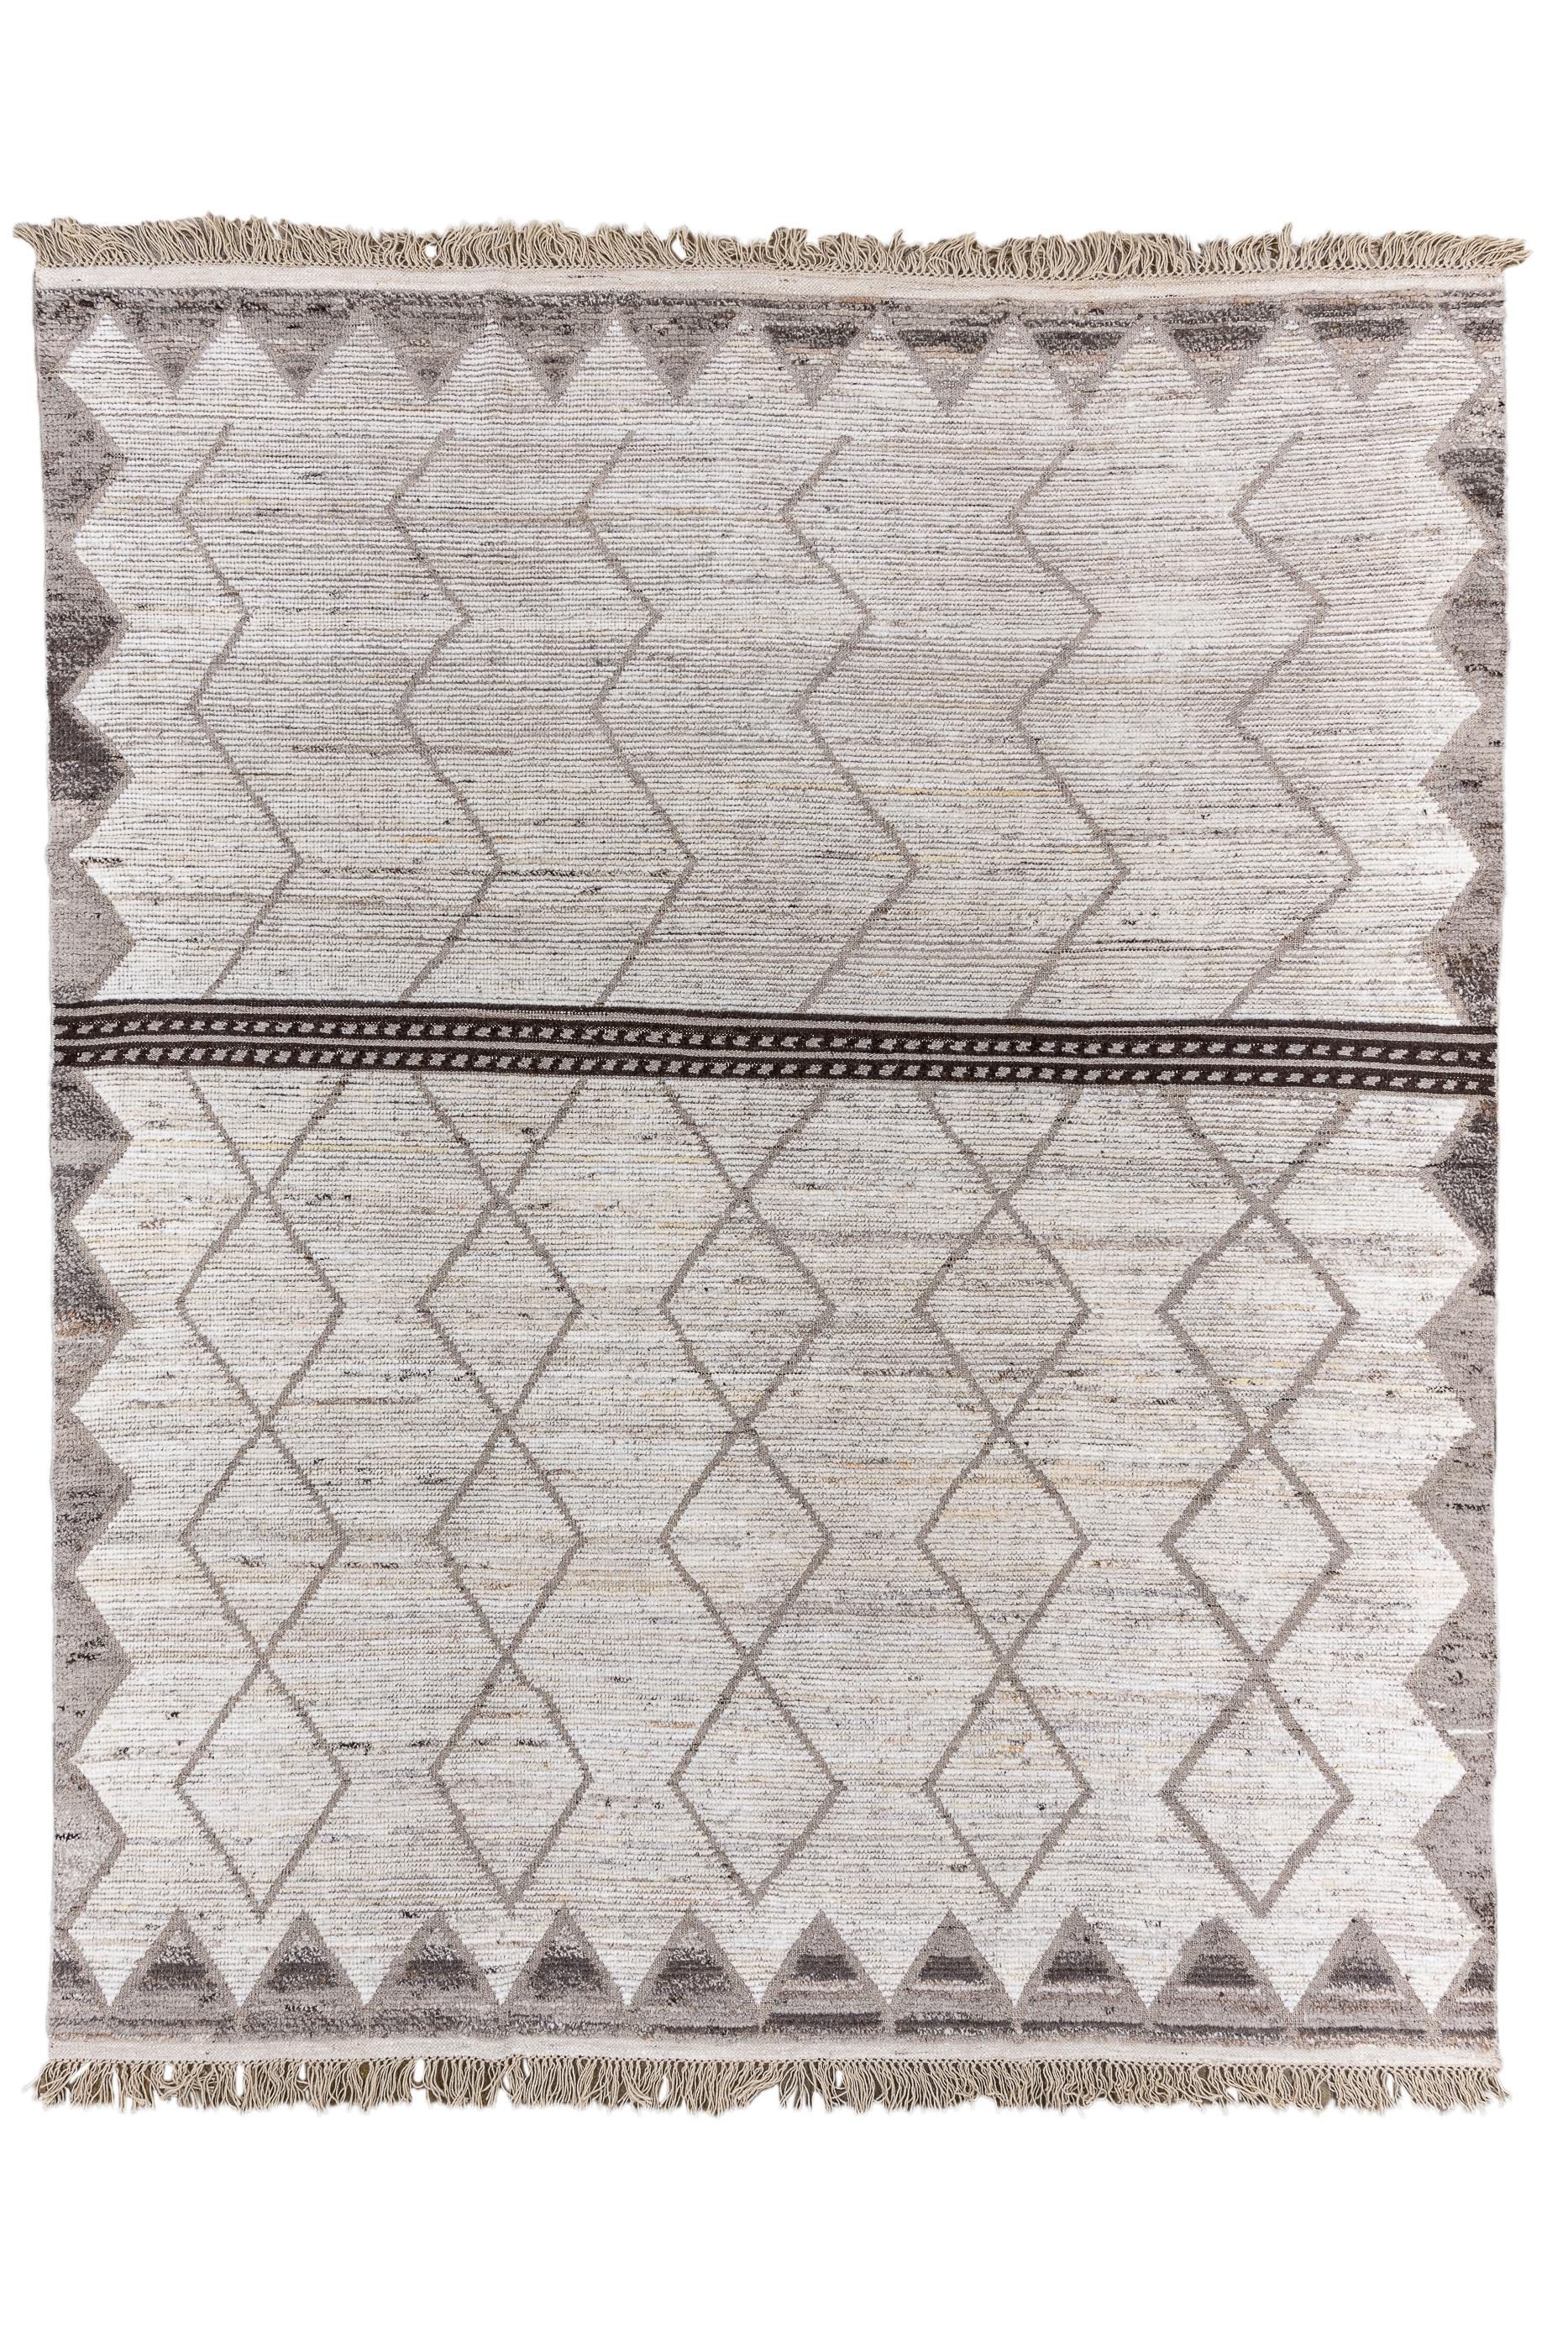 This ecru ground Turkish village creation shows five columns of connected open brown outlined lozenges, with a dark brown thick horizontal line partway up. Brown triangle border. Coarse weave. As new condition.
Measures 8'4x10'4.